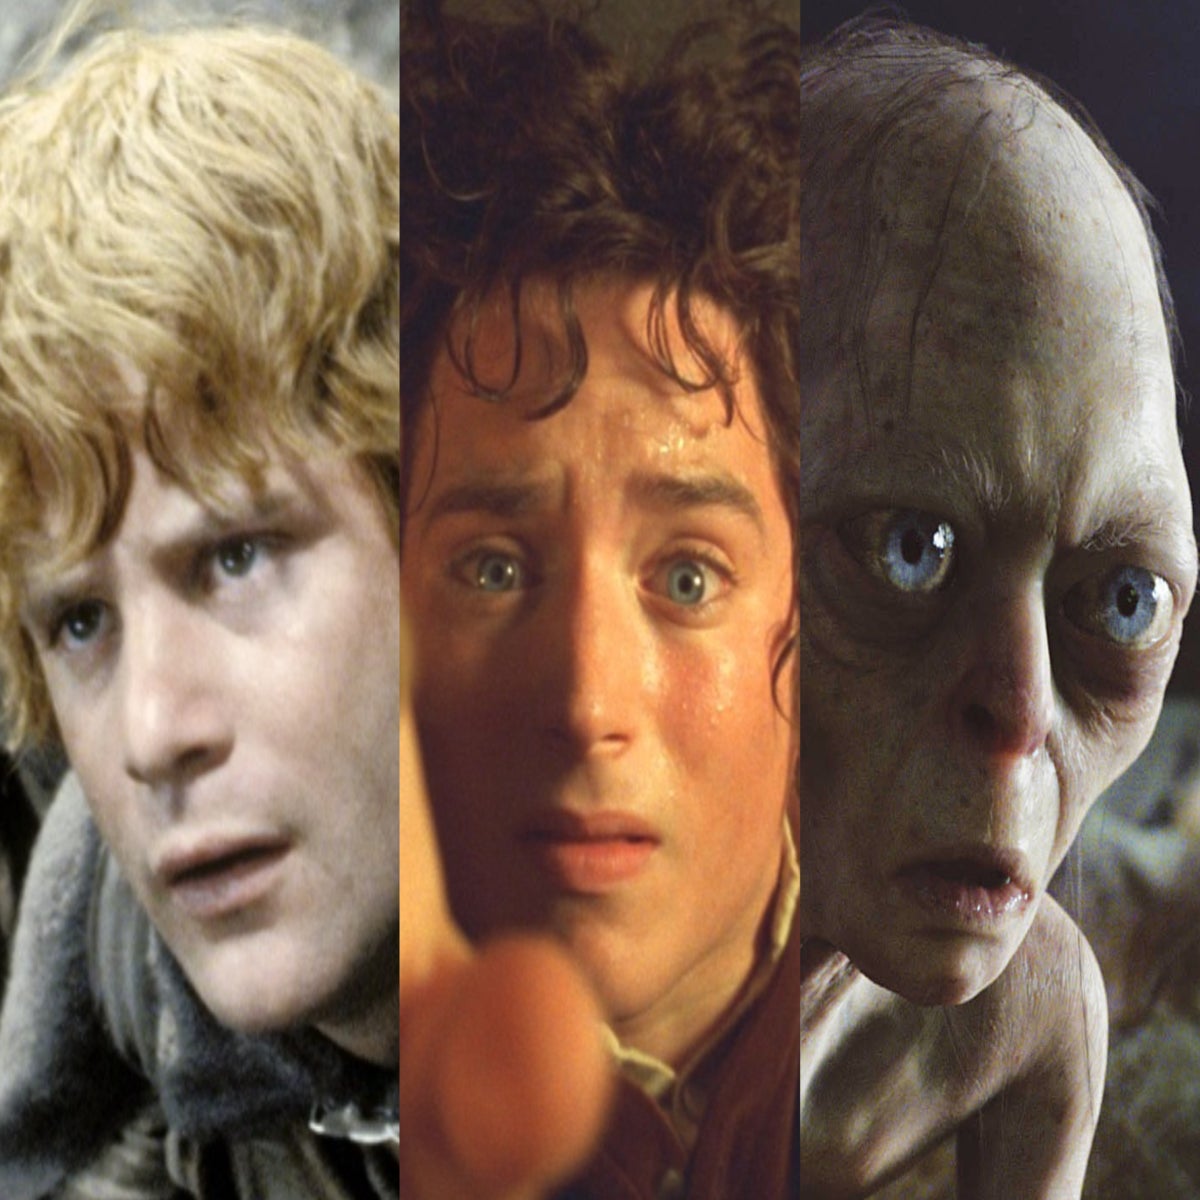 Peter Jackson's 'The Lord of the Rings' trilogy turns 20